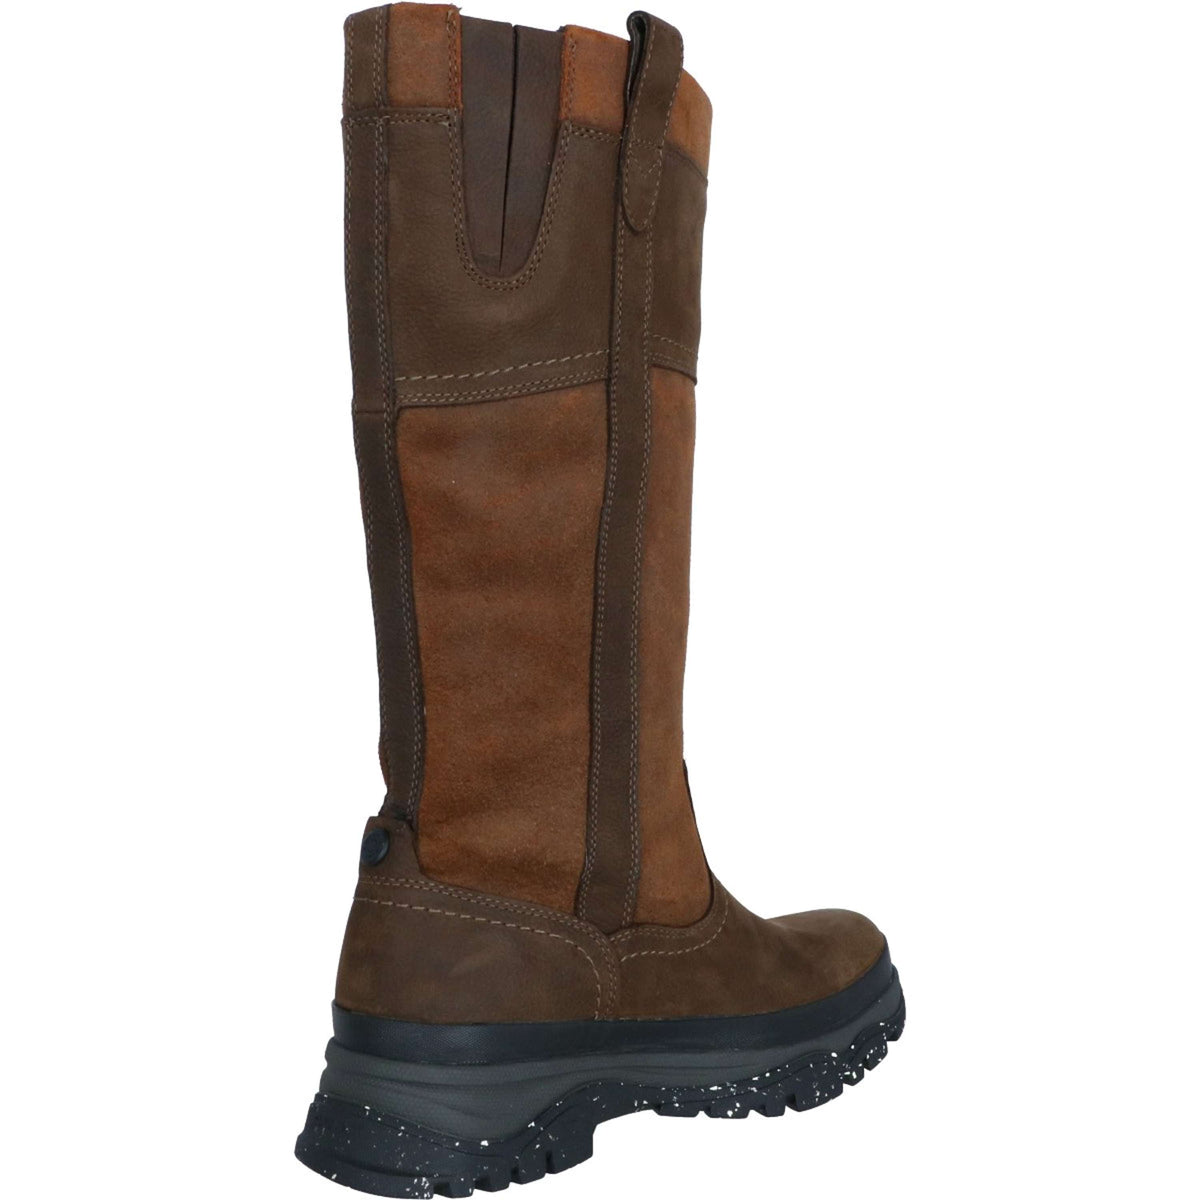 Ariat Outdoorstiefel Moresby Tall H2O Herren Java